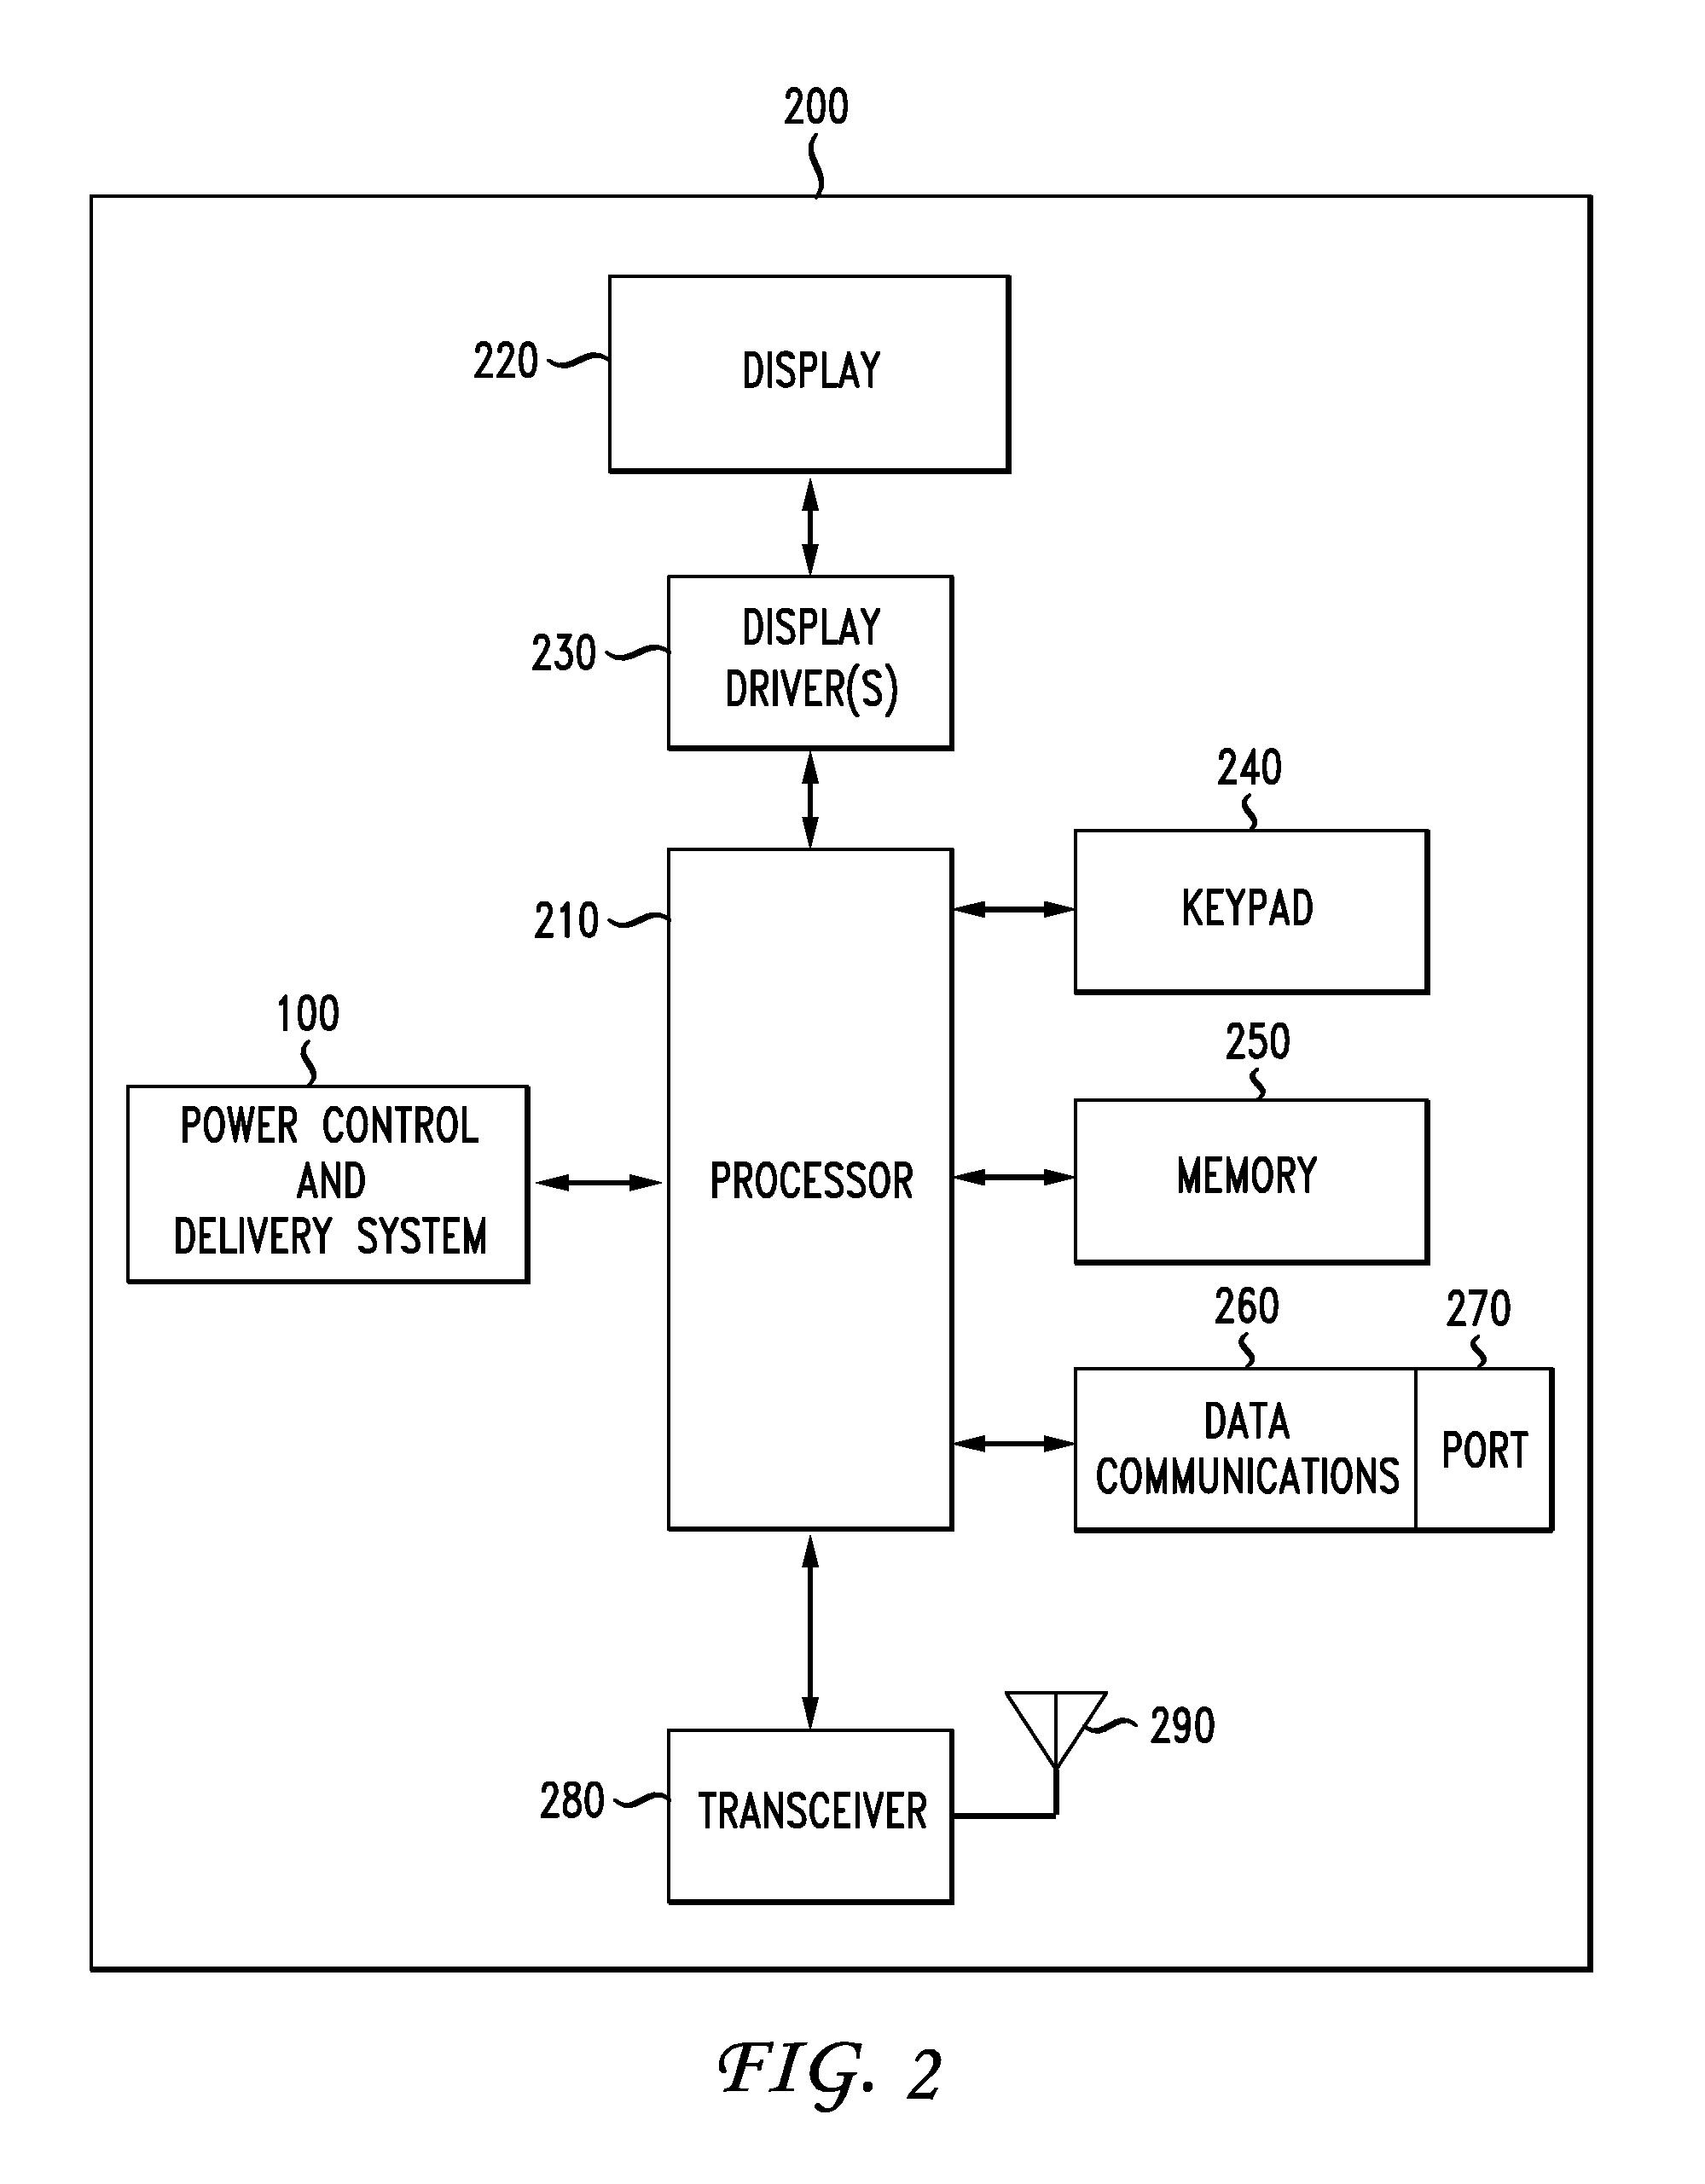 Method and Apparatus for Intelligent Battery Control